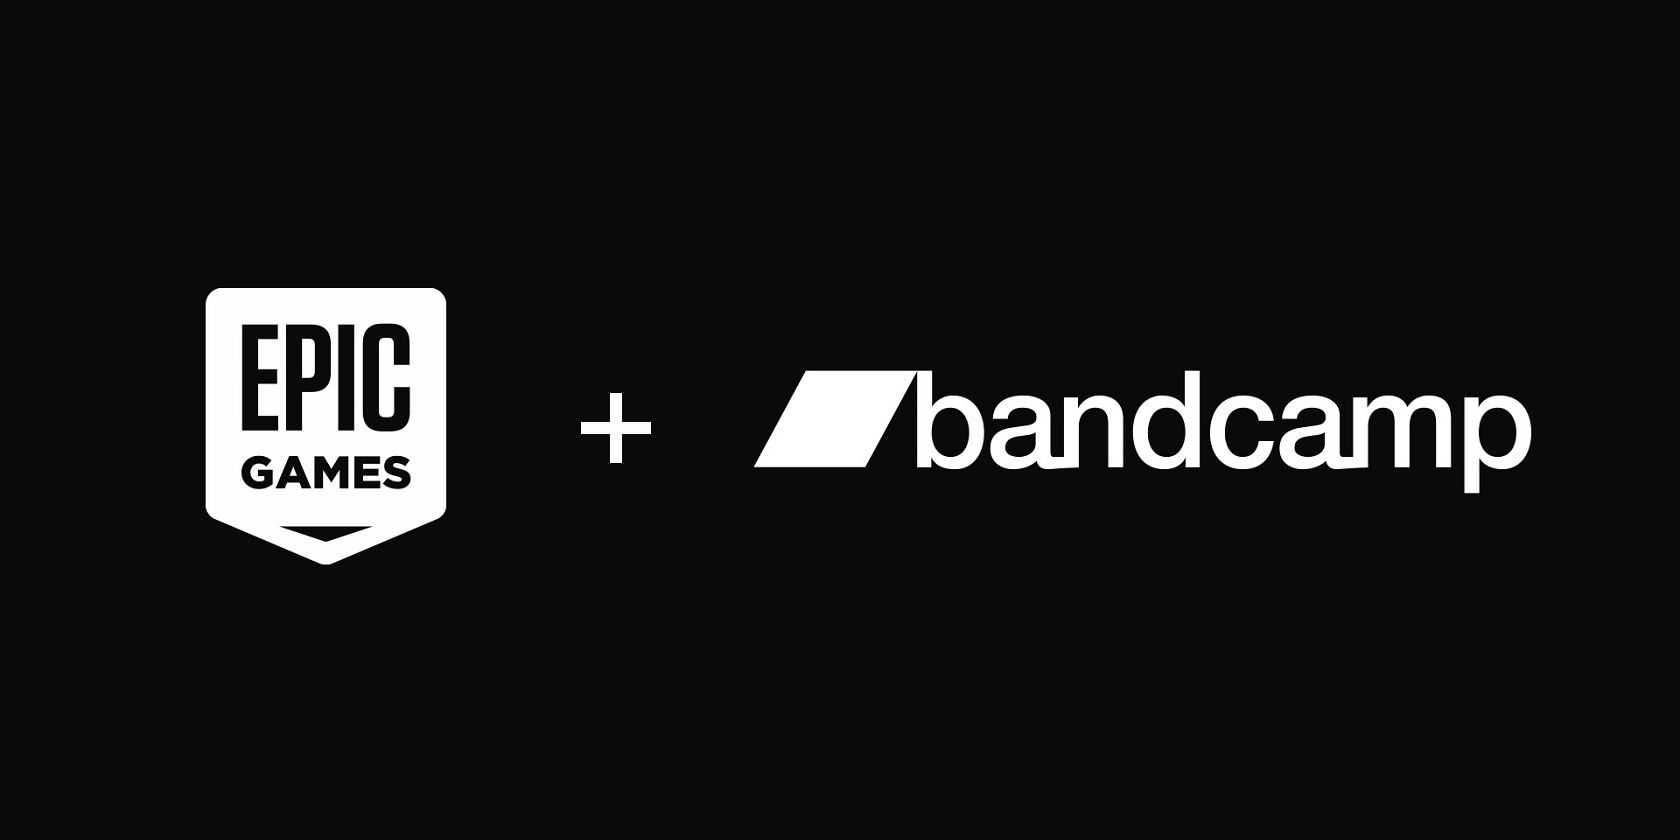 epic-games-acquires-bandcamp.jpg